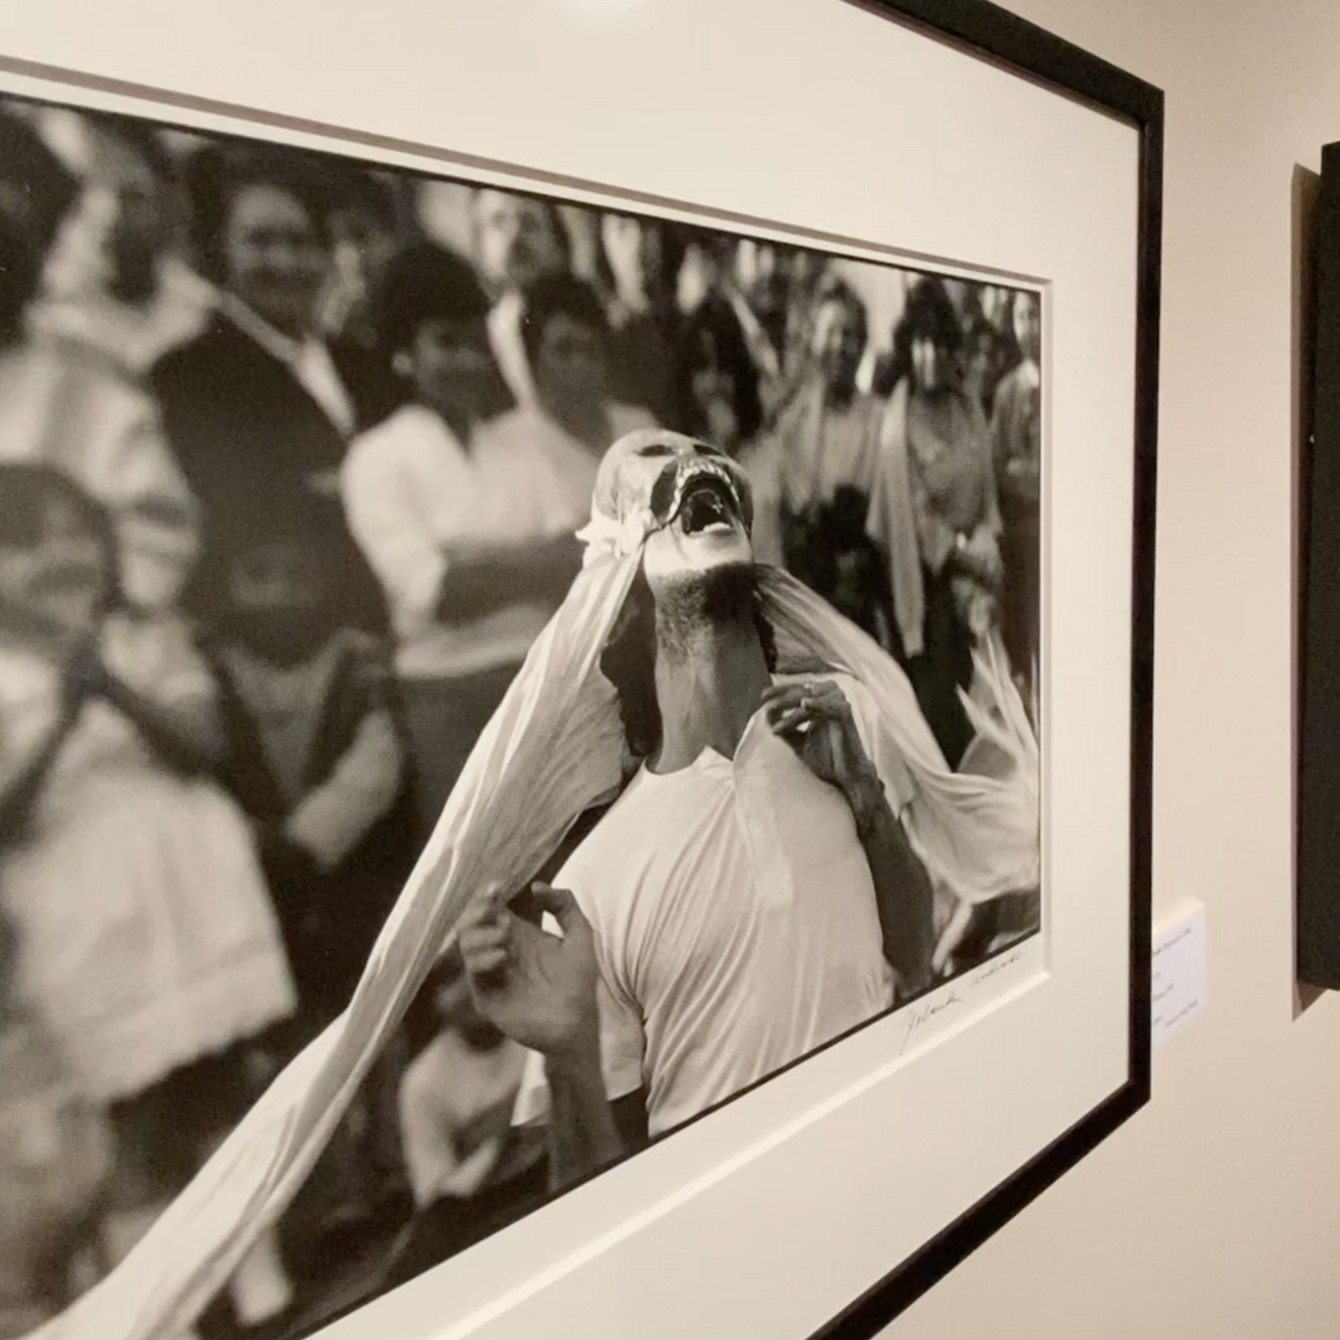 Photos on display from our Mexican Photographers Collection